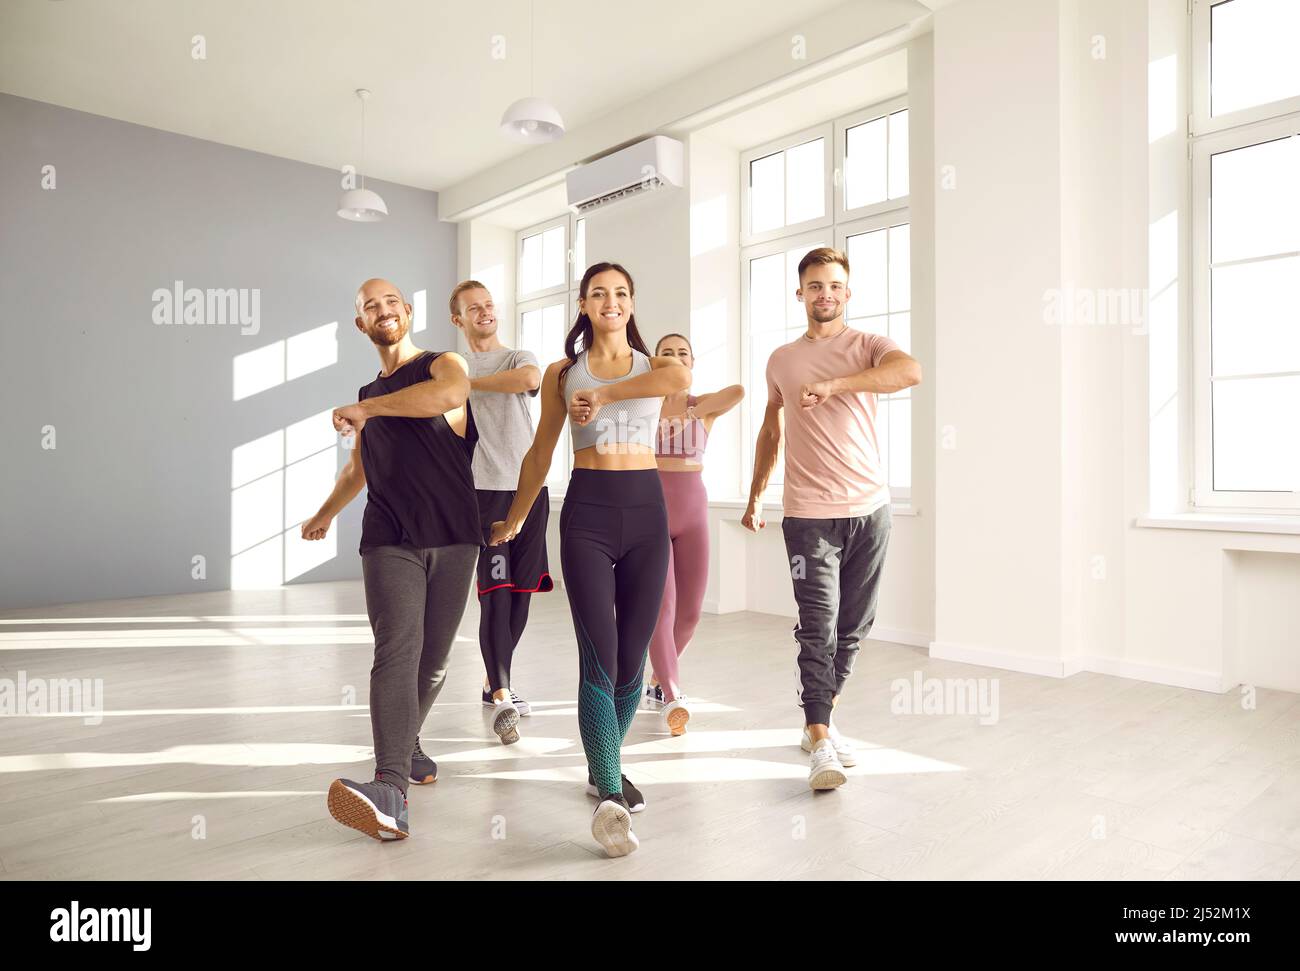 Group of happy young people doing sports exercises together while training in fitness studio. Stock Photo